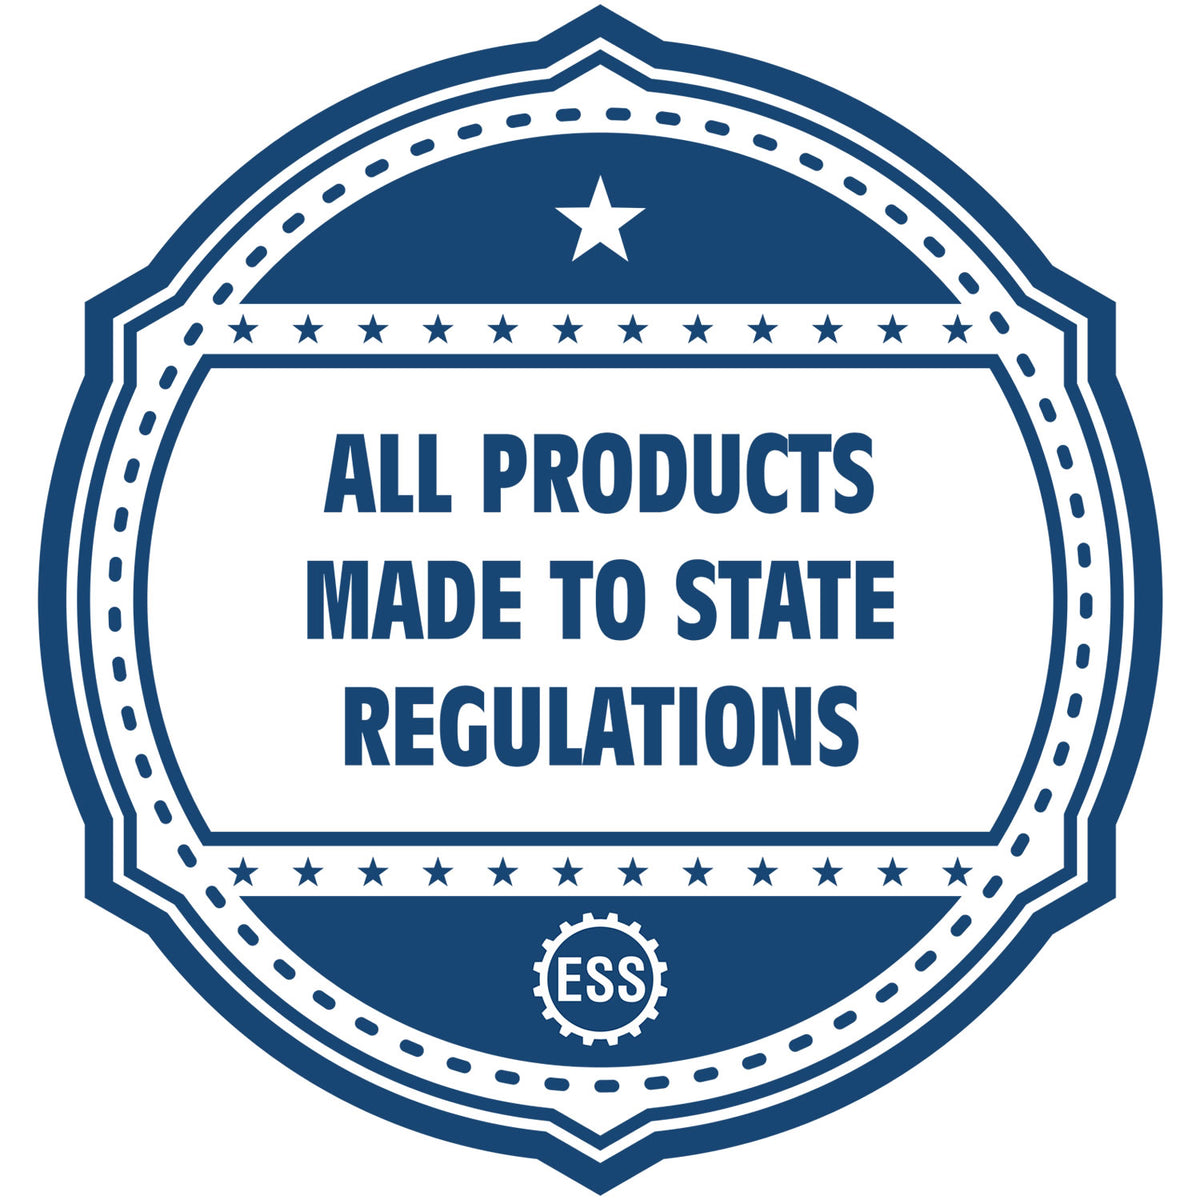 An icon or badge element for the Slim Pre-Inked Idaho Professional Engineer Seal Stamp showing that this product is made in compliance with state regulations.